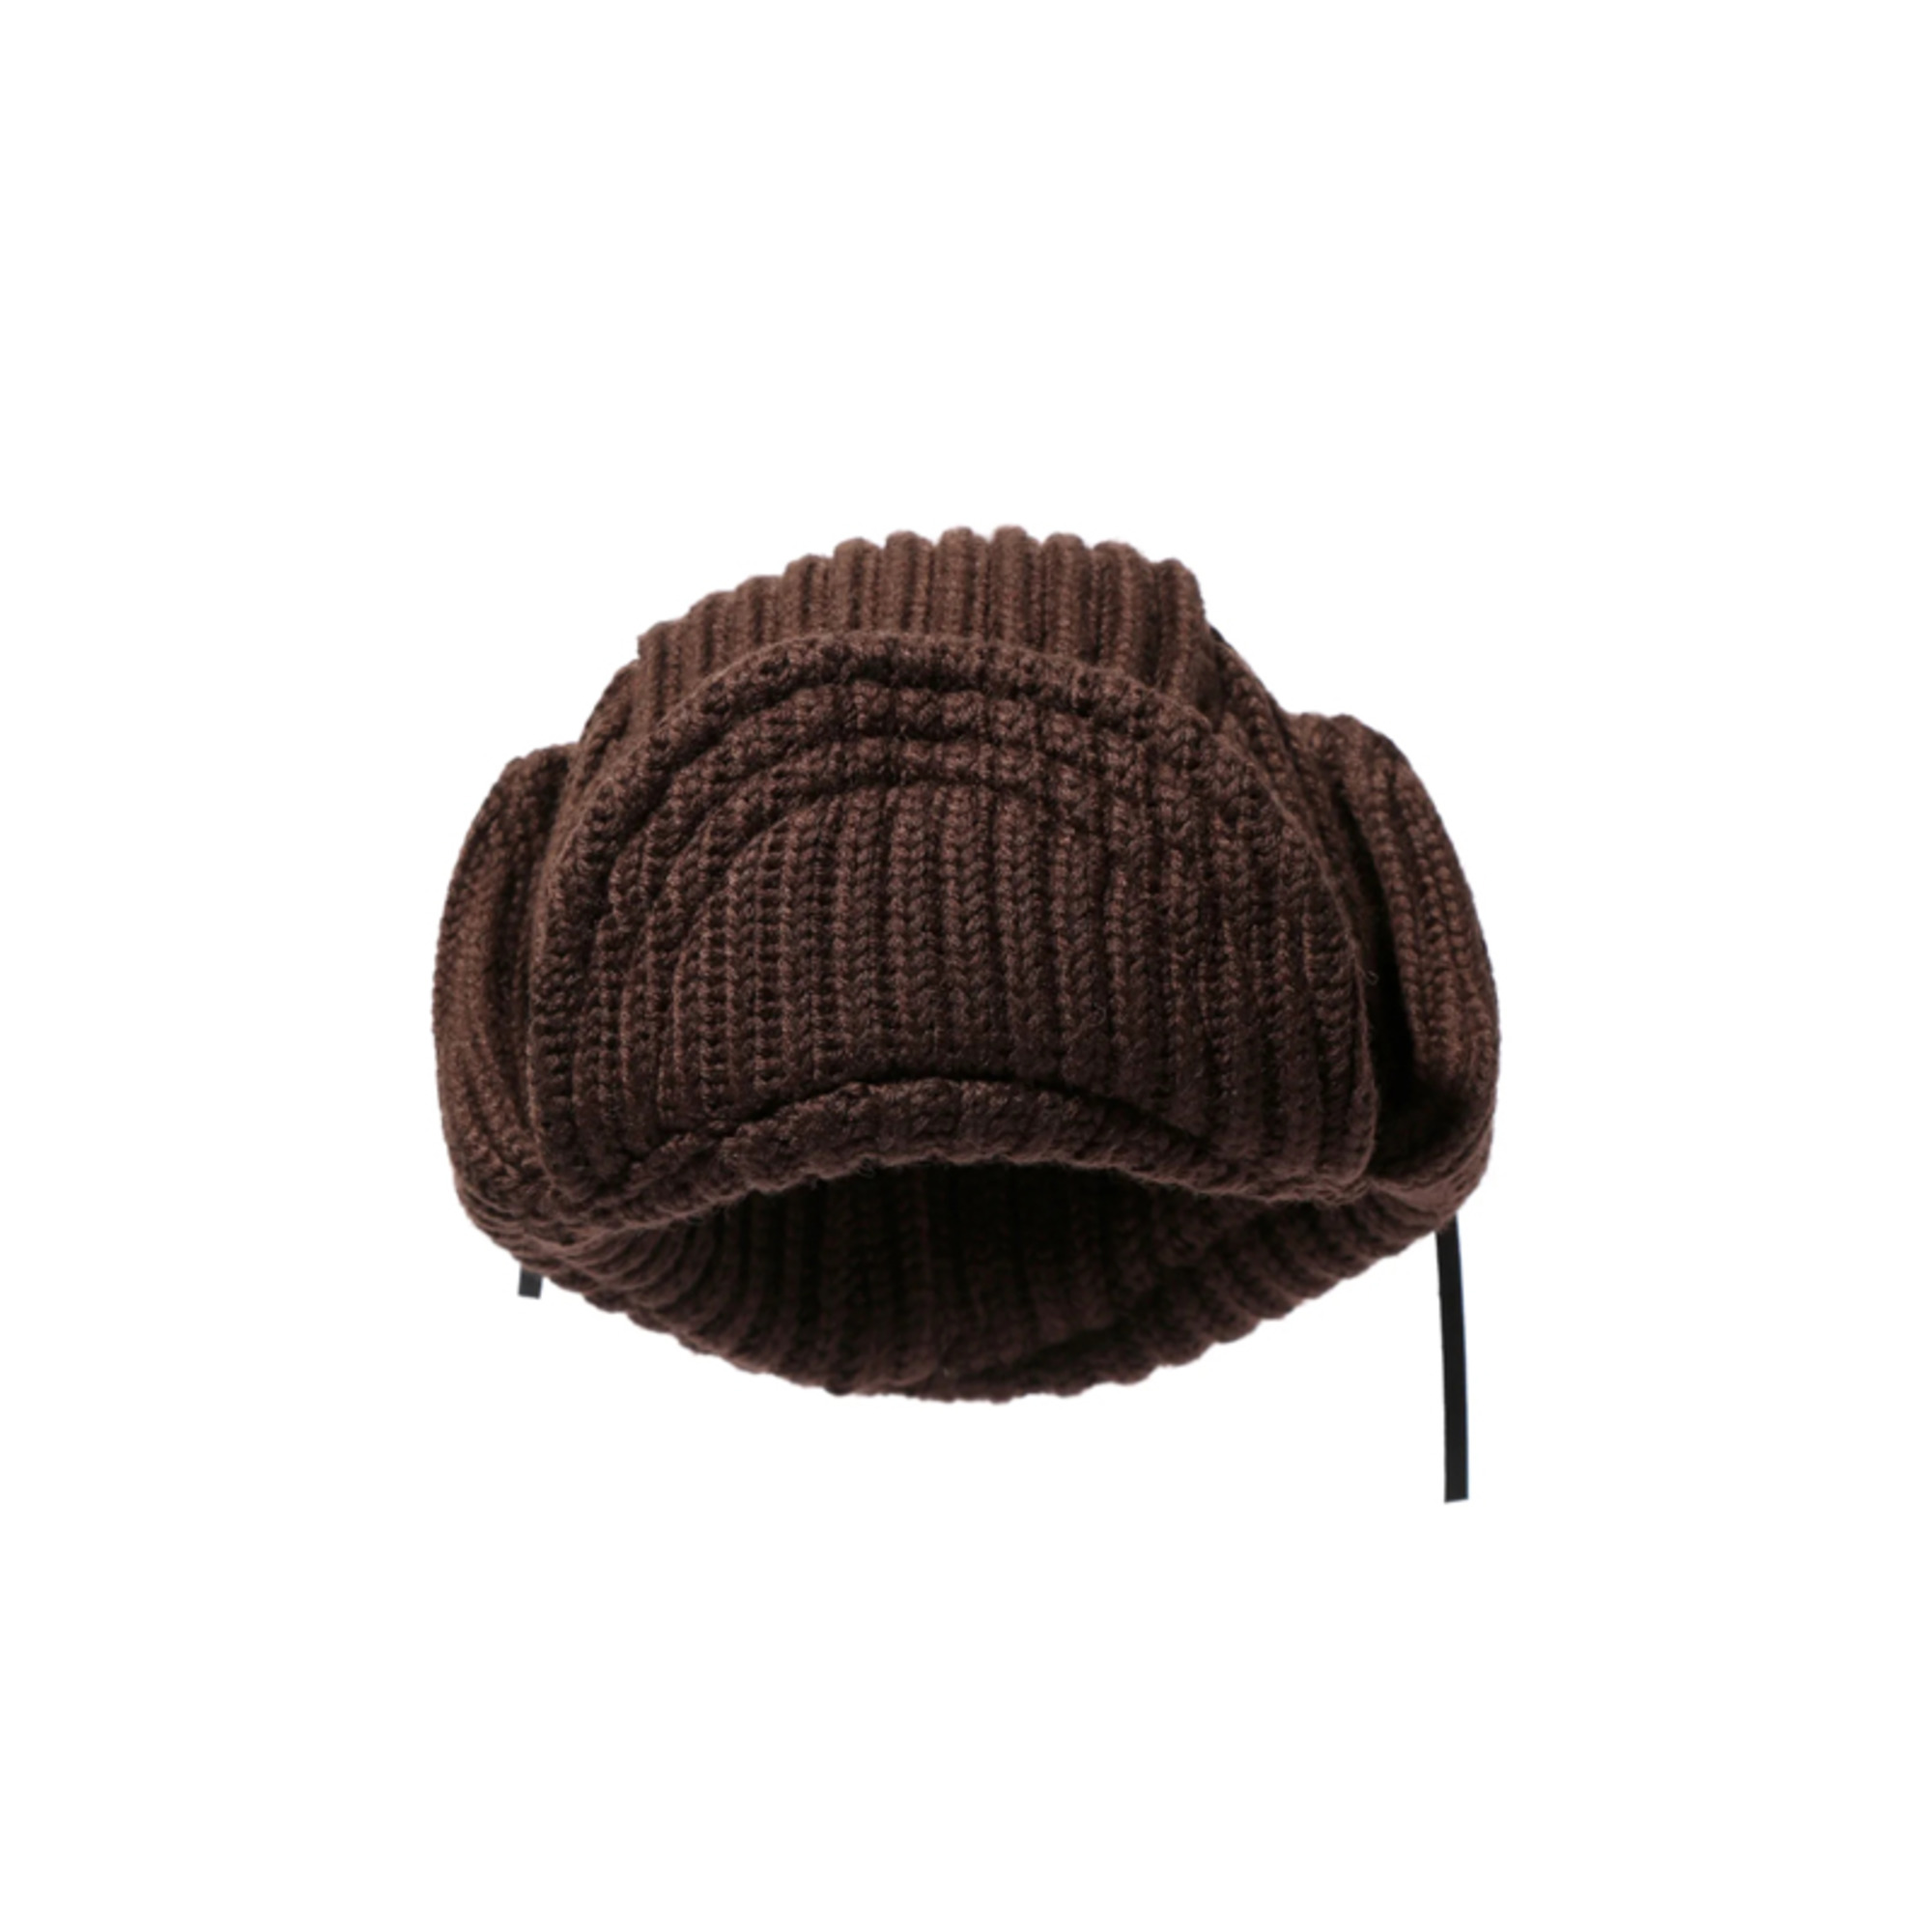 SOUTH2 WEST8 22AW Bomber Cap-W/A Knit